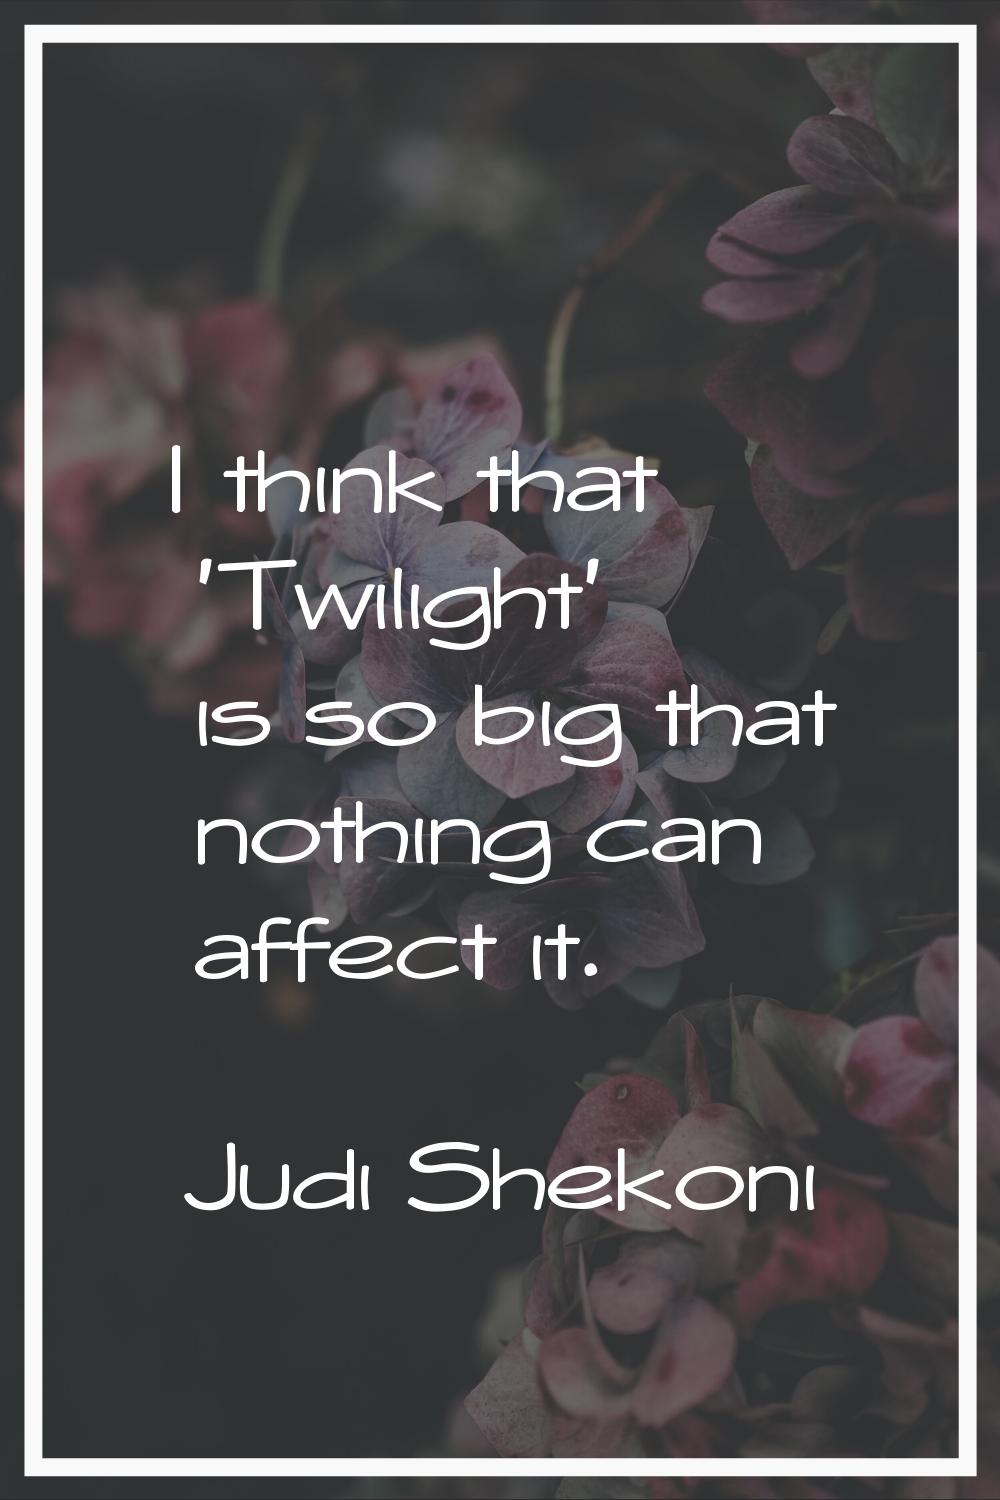 I think that 'Twilight' is so big that nothing can affect it.